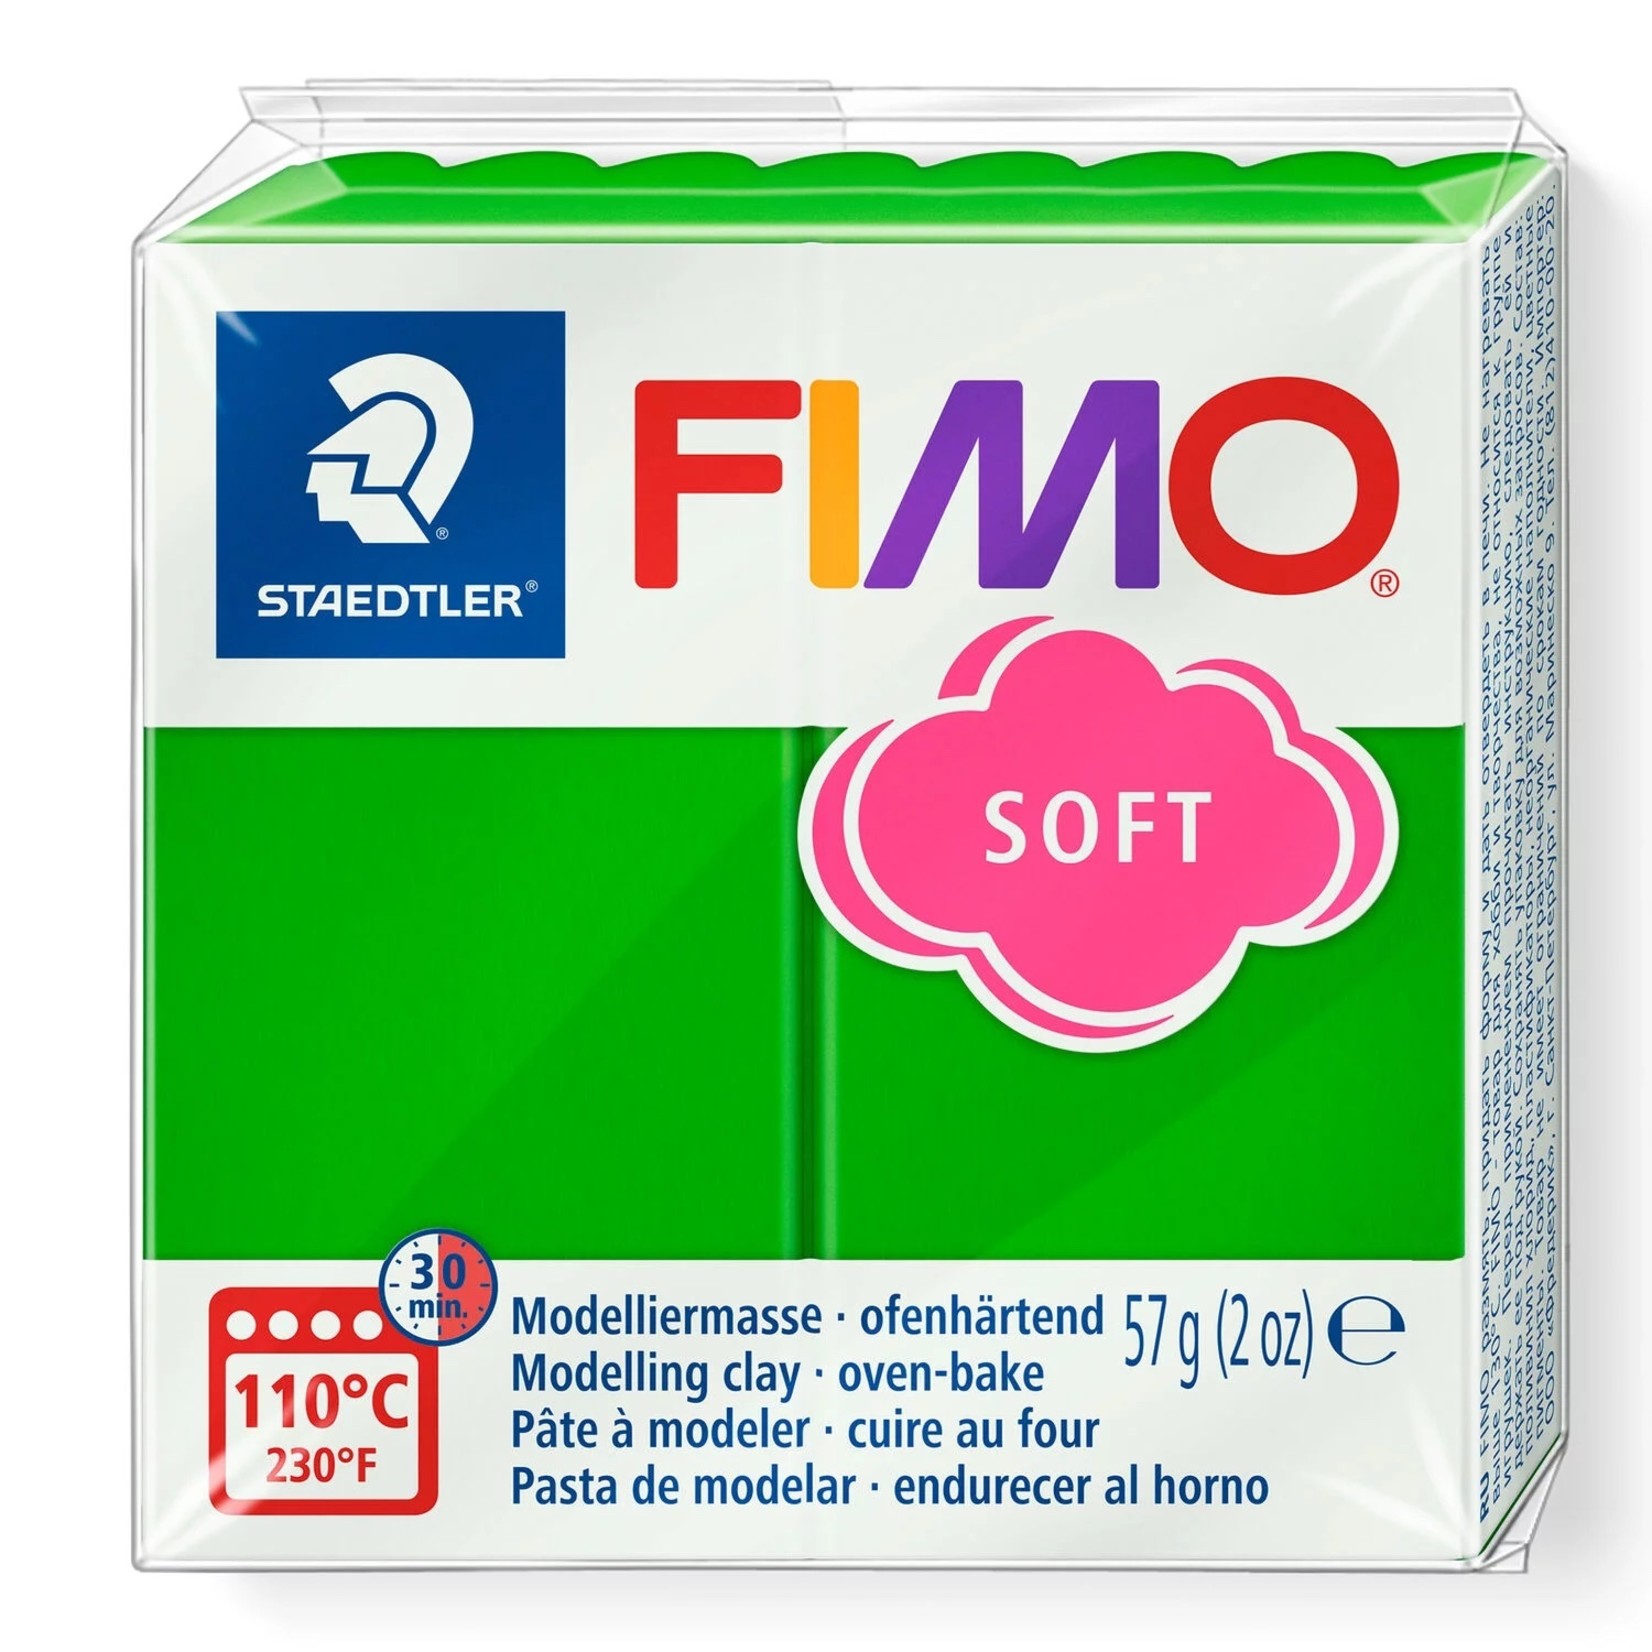 STAEDTLER FIMO SOFT 53 TROPICAL GREEN